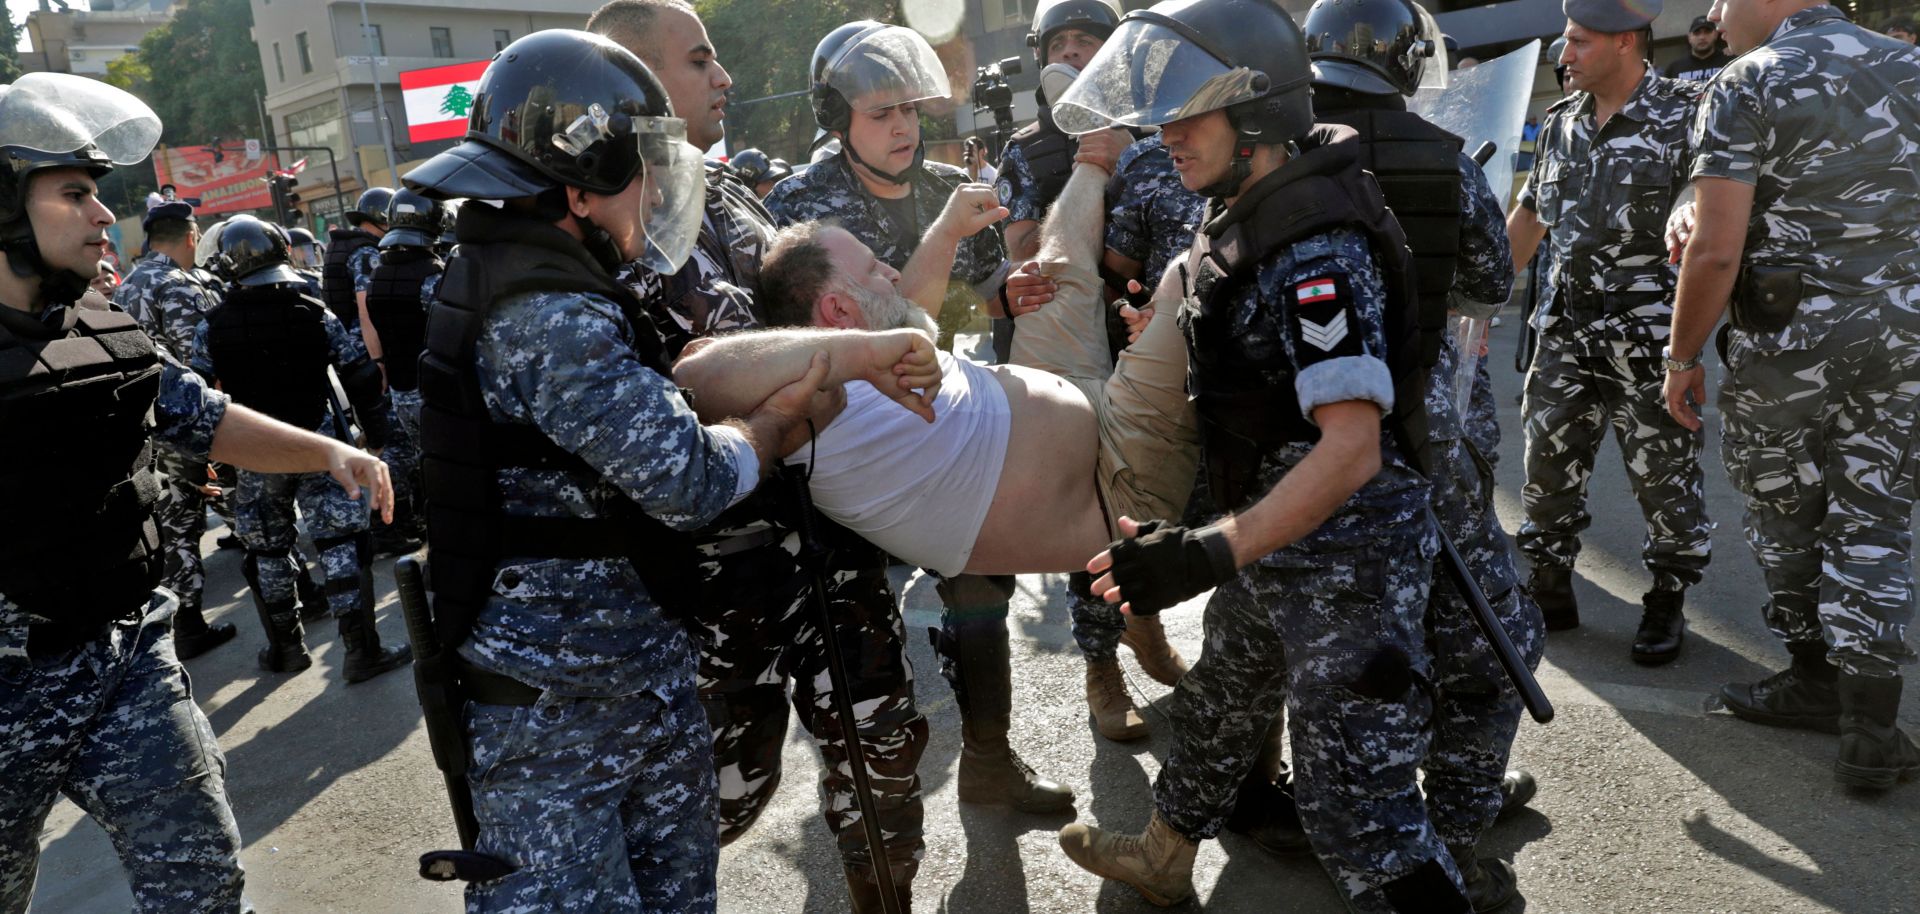 Lebanese riot police officers remove anti-government protesters as they dismantle a roadblock in the Lebanese capital of Beirut on Oct. 31, 2019. Traffic came to a standstill on major highways, as protesters erected metal barricades.